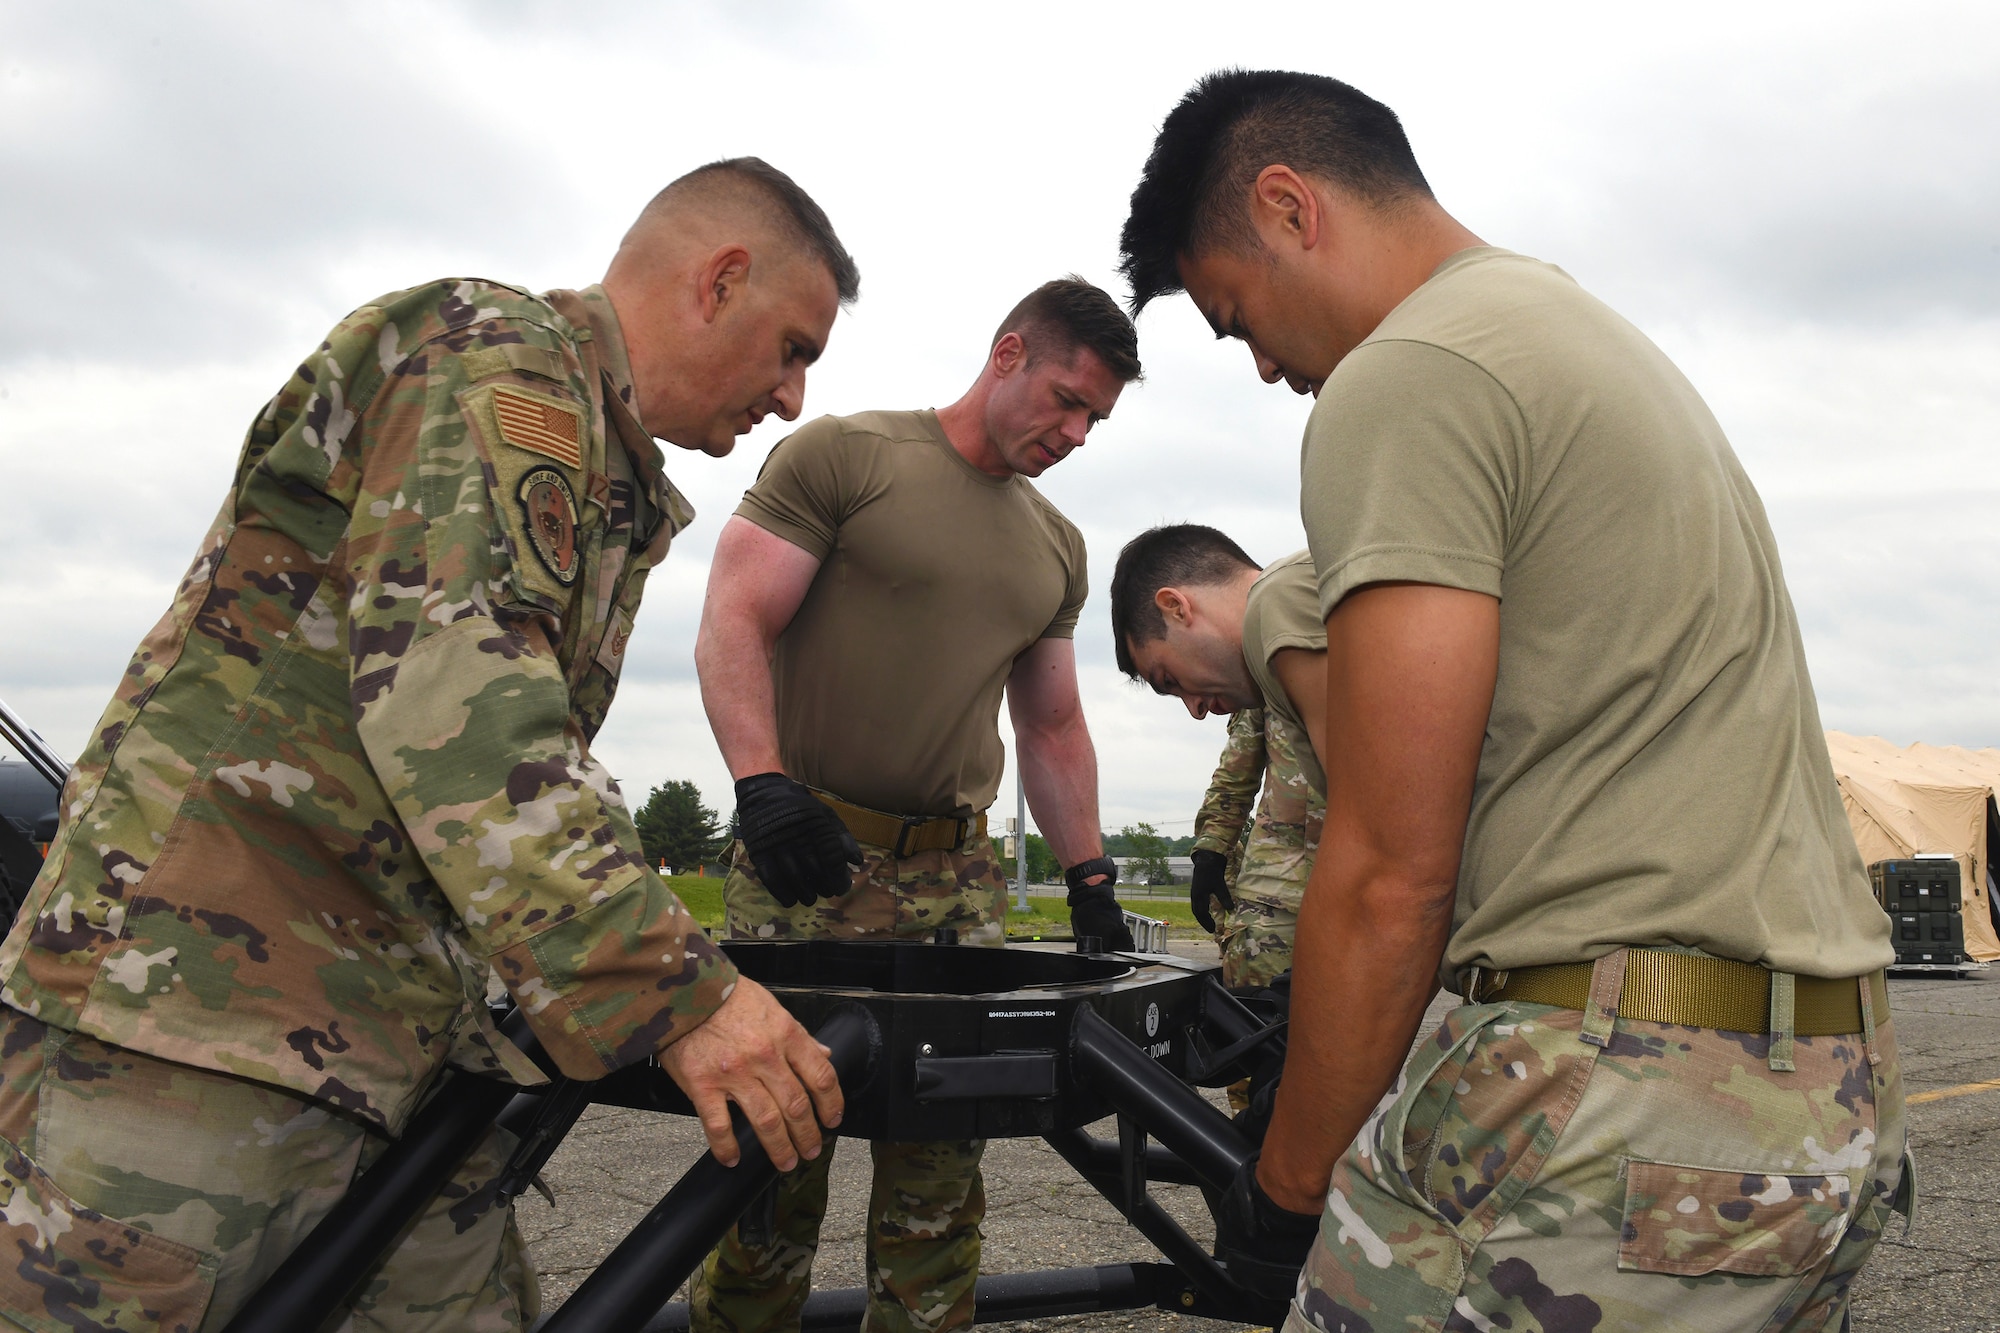 From left to right, Tech. Sgt. Salvatore Izzo, Tech. Sgt. Christopher Hodge, Staff Sgt. Christopher Jones and 1st Lt. Zachary Burns – all with the Florida Air National Guard’s 114th Electromagnetic Warfare Squadron – stabilize what will be the base of an antenna as part of exercise ThunderMoose, June 13, 2023, at Bangor Air National Guard Base in Maine.